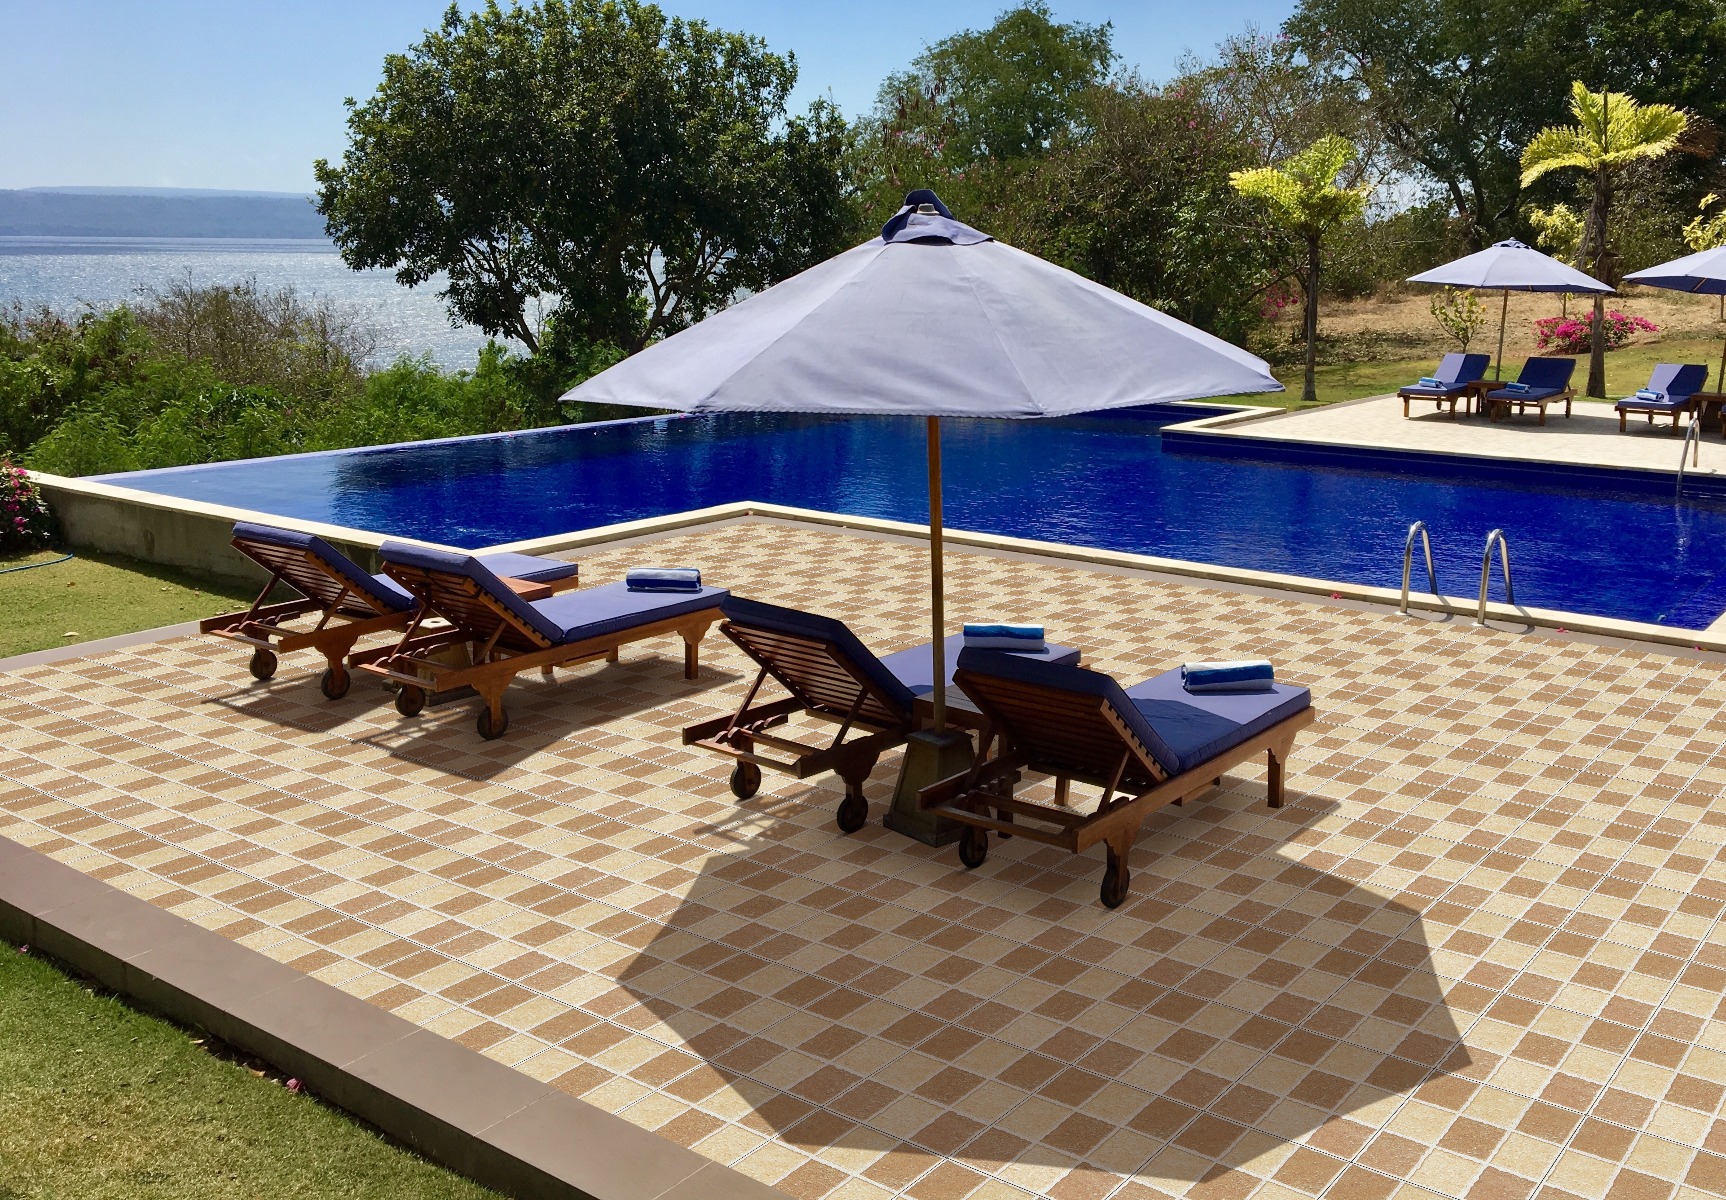 Swimming Pool Tiles for Automotive Tiles